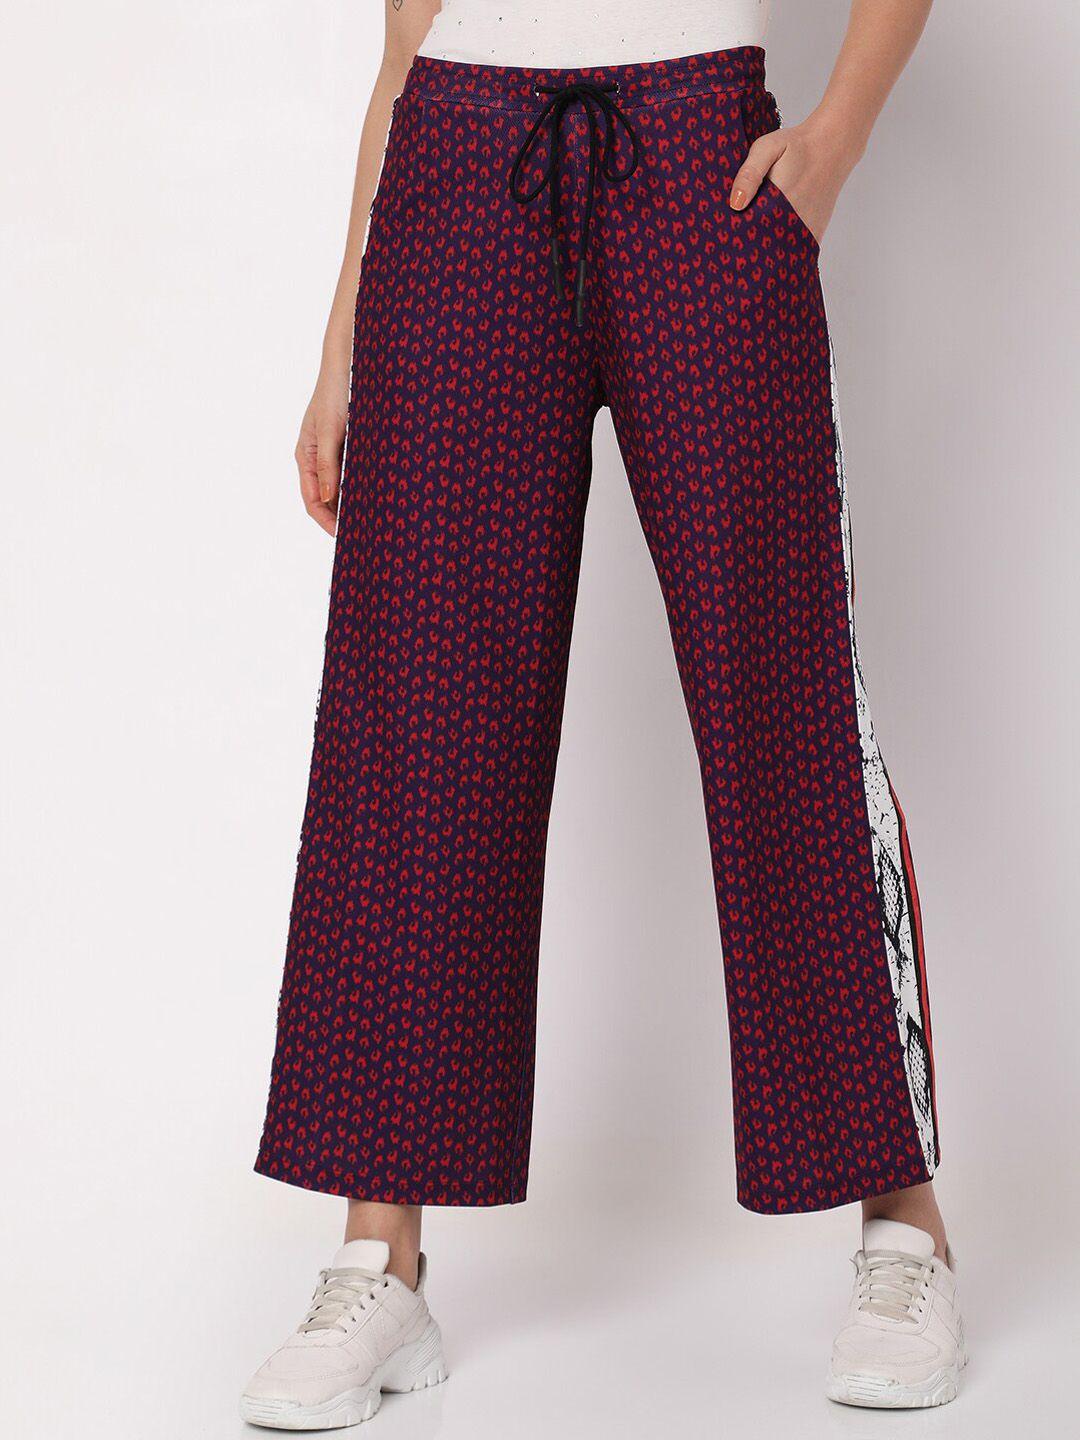 vero moda women purple printed relaxed-fit track pants